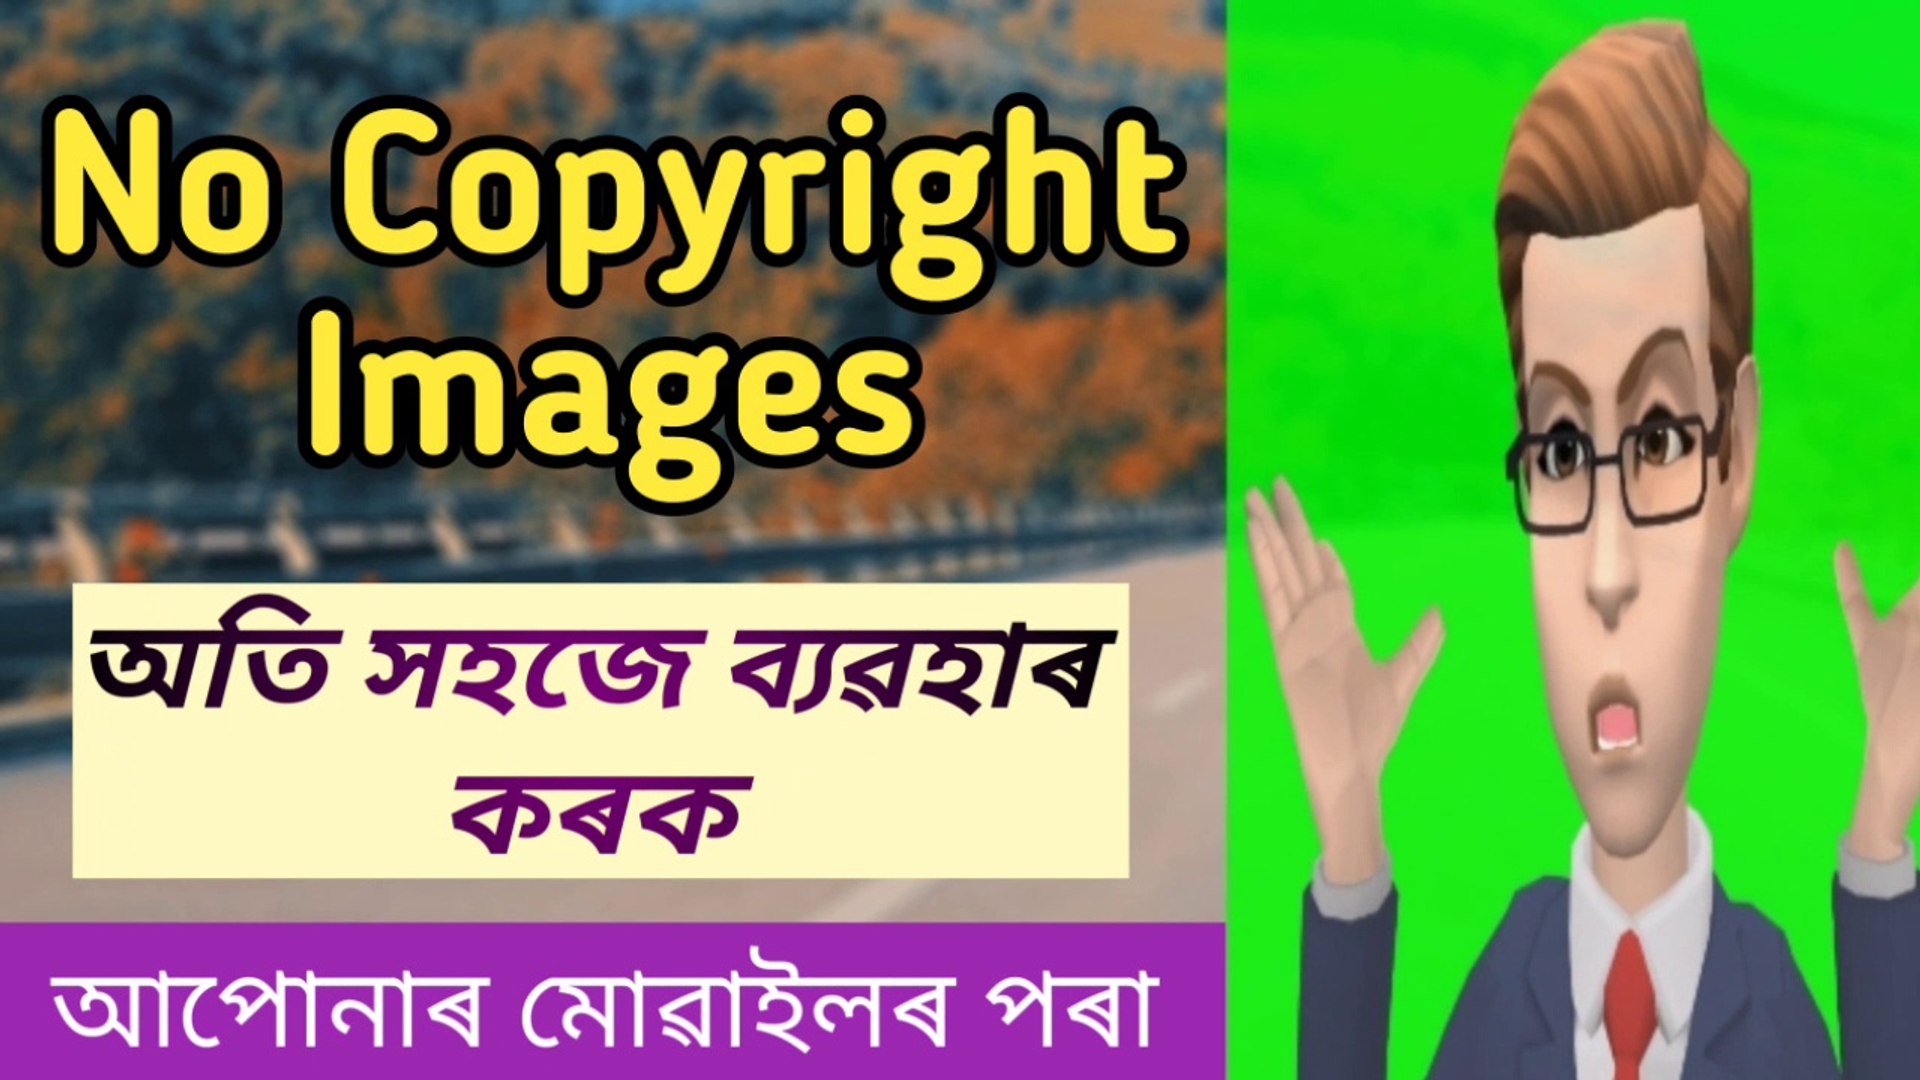 No copyright Images for youtube|Google Images 2020|Google Images without copyright|No copyright Imag